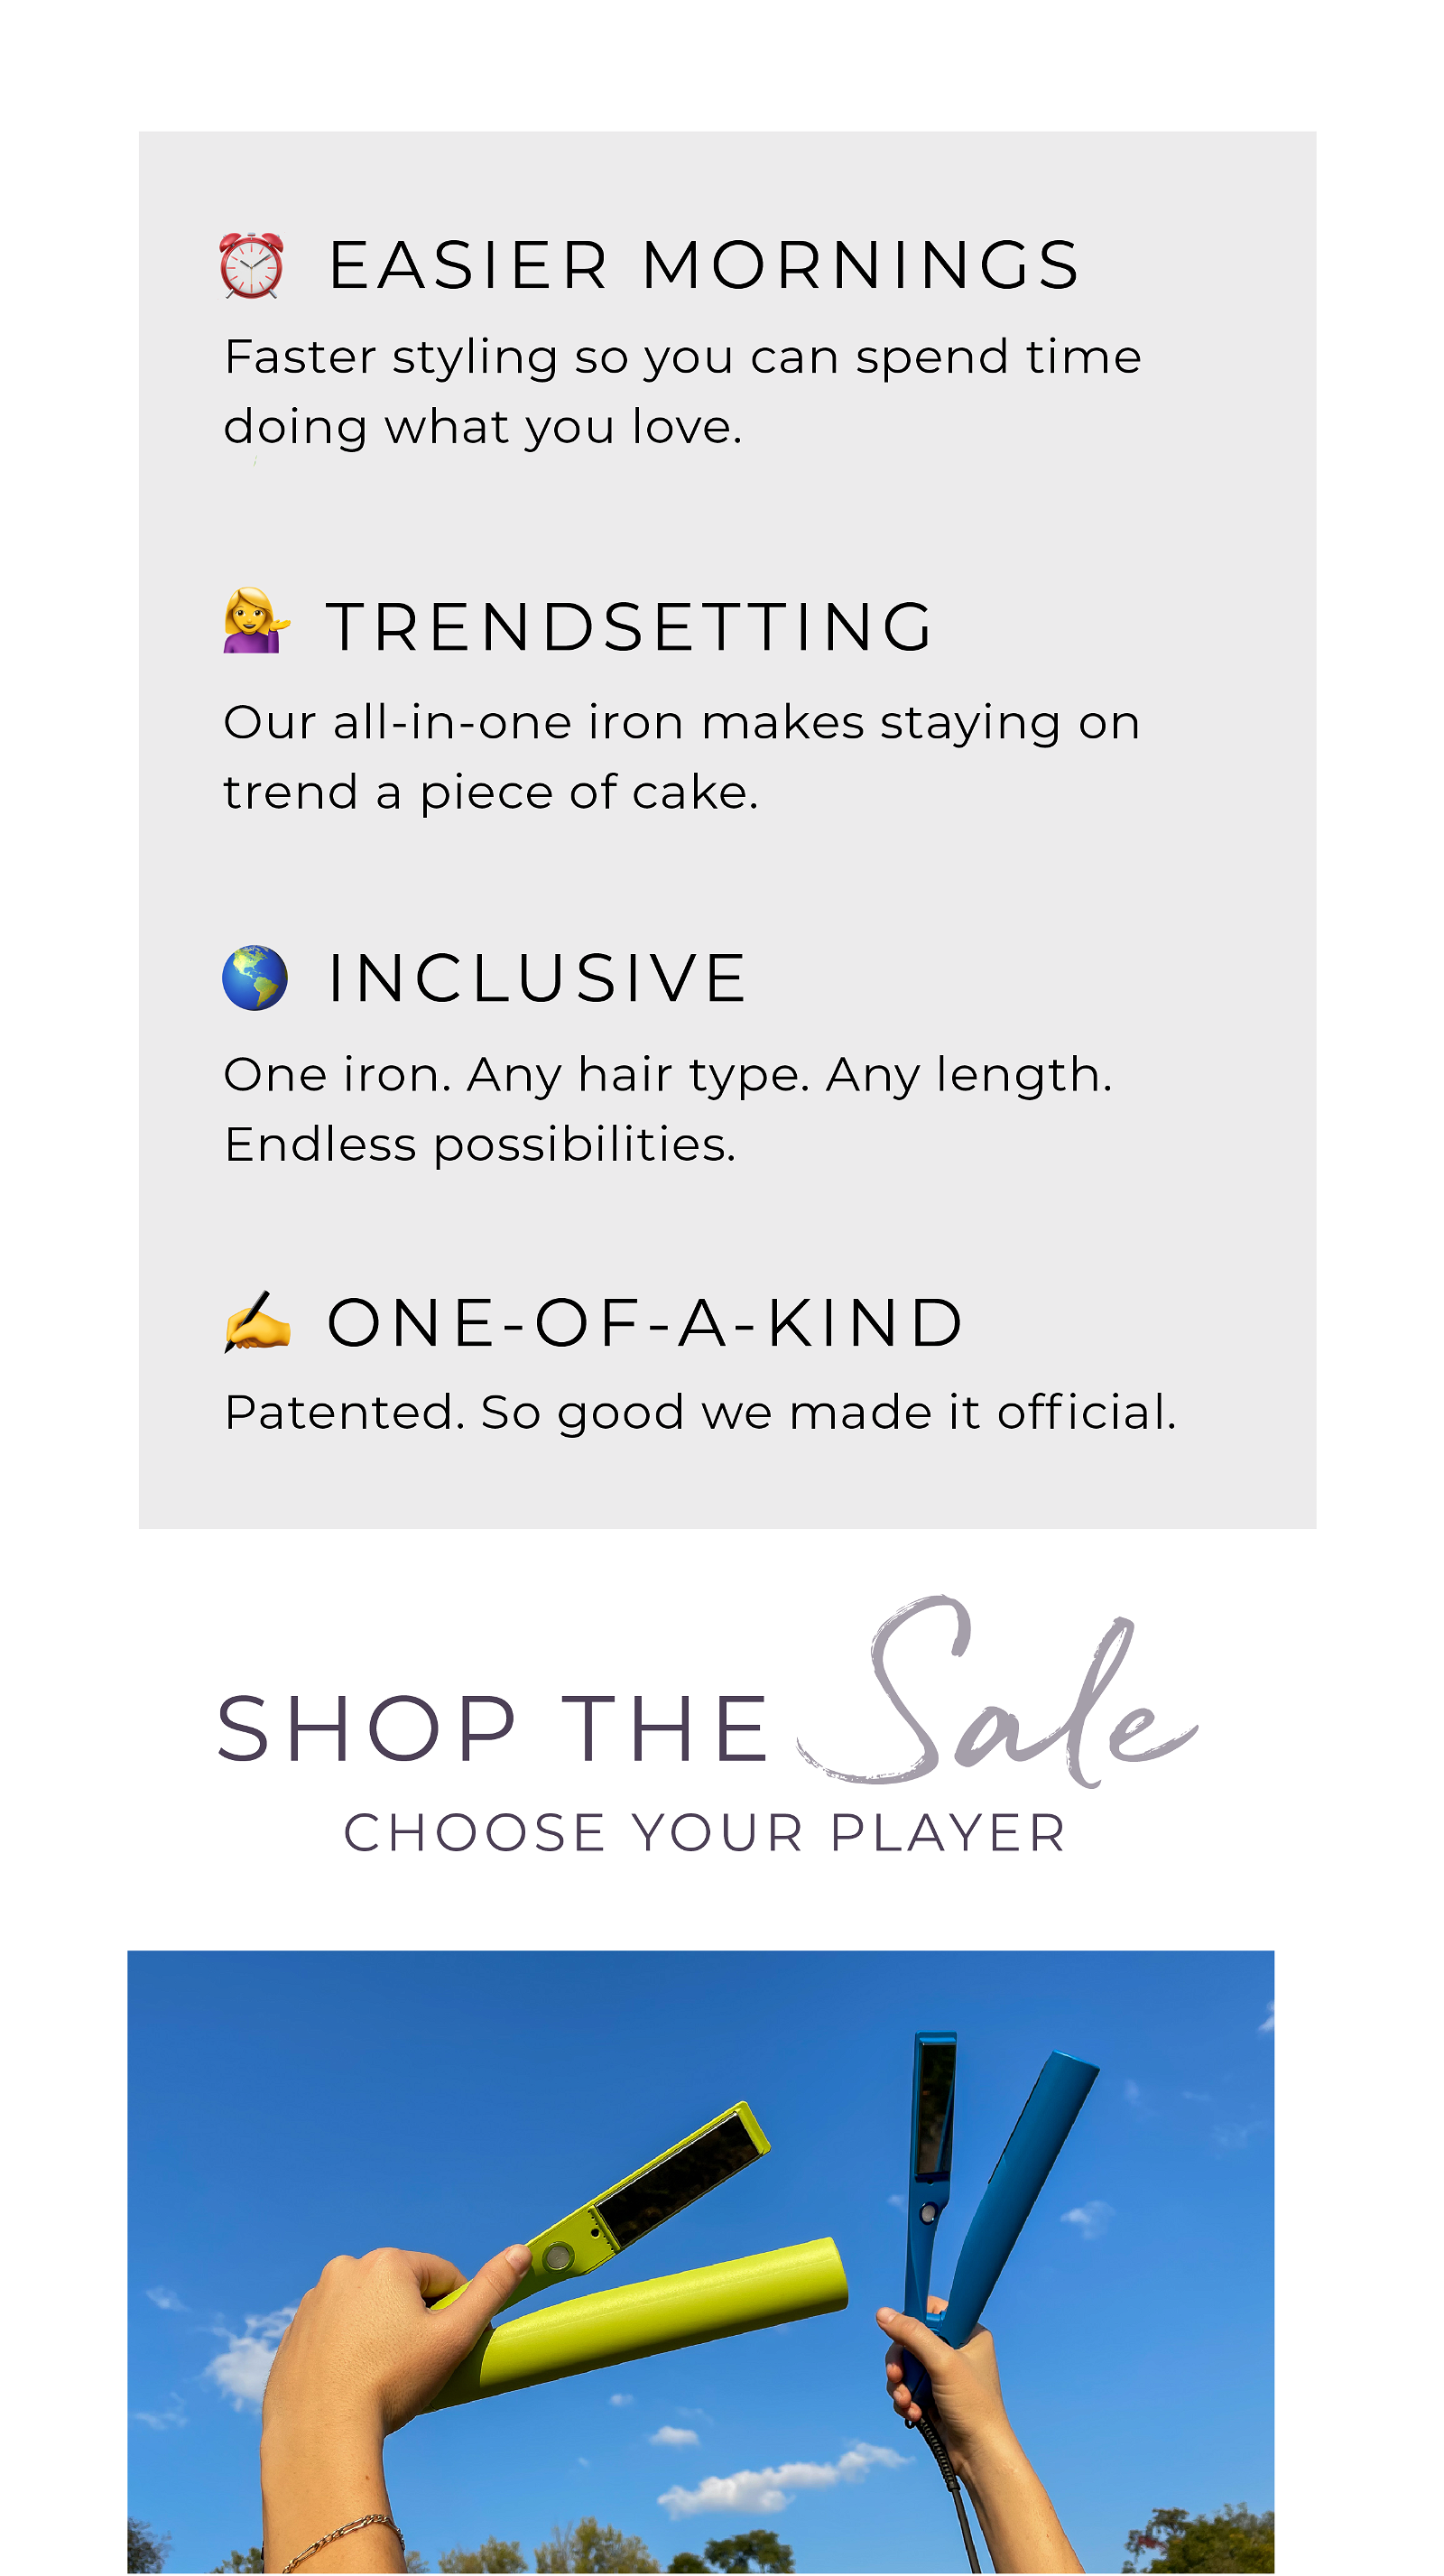 Easier mornings, trendsetting, inclusive, one-of-a-kind. Choose your player. Shop the sale.